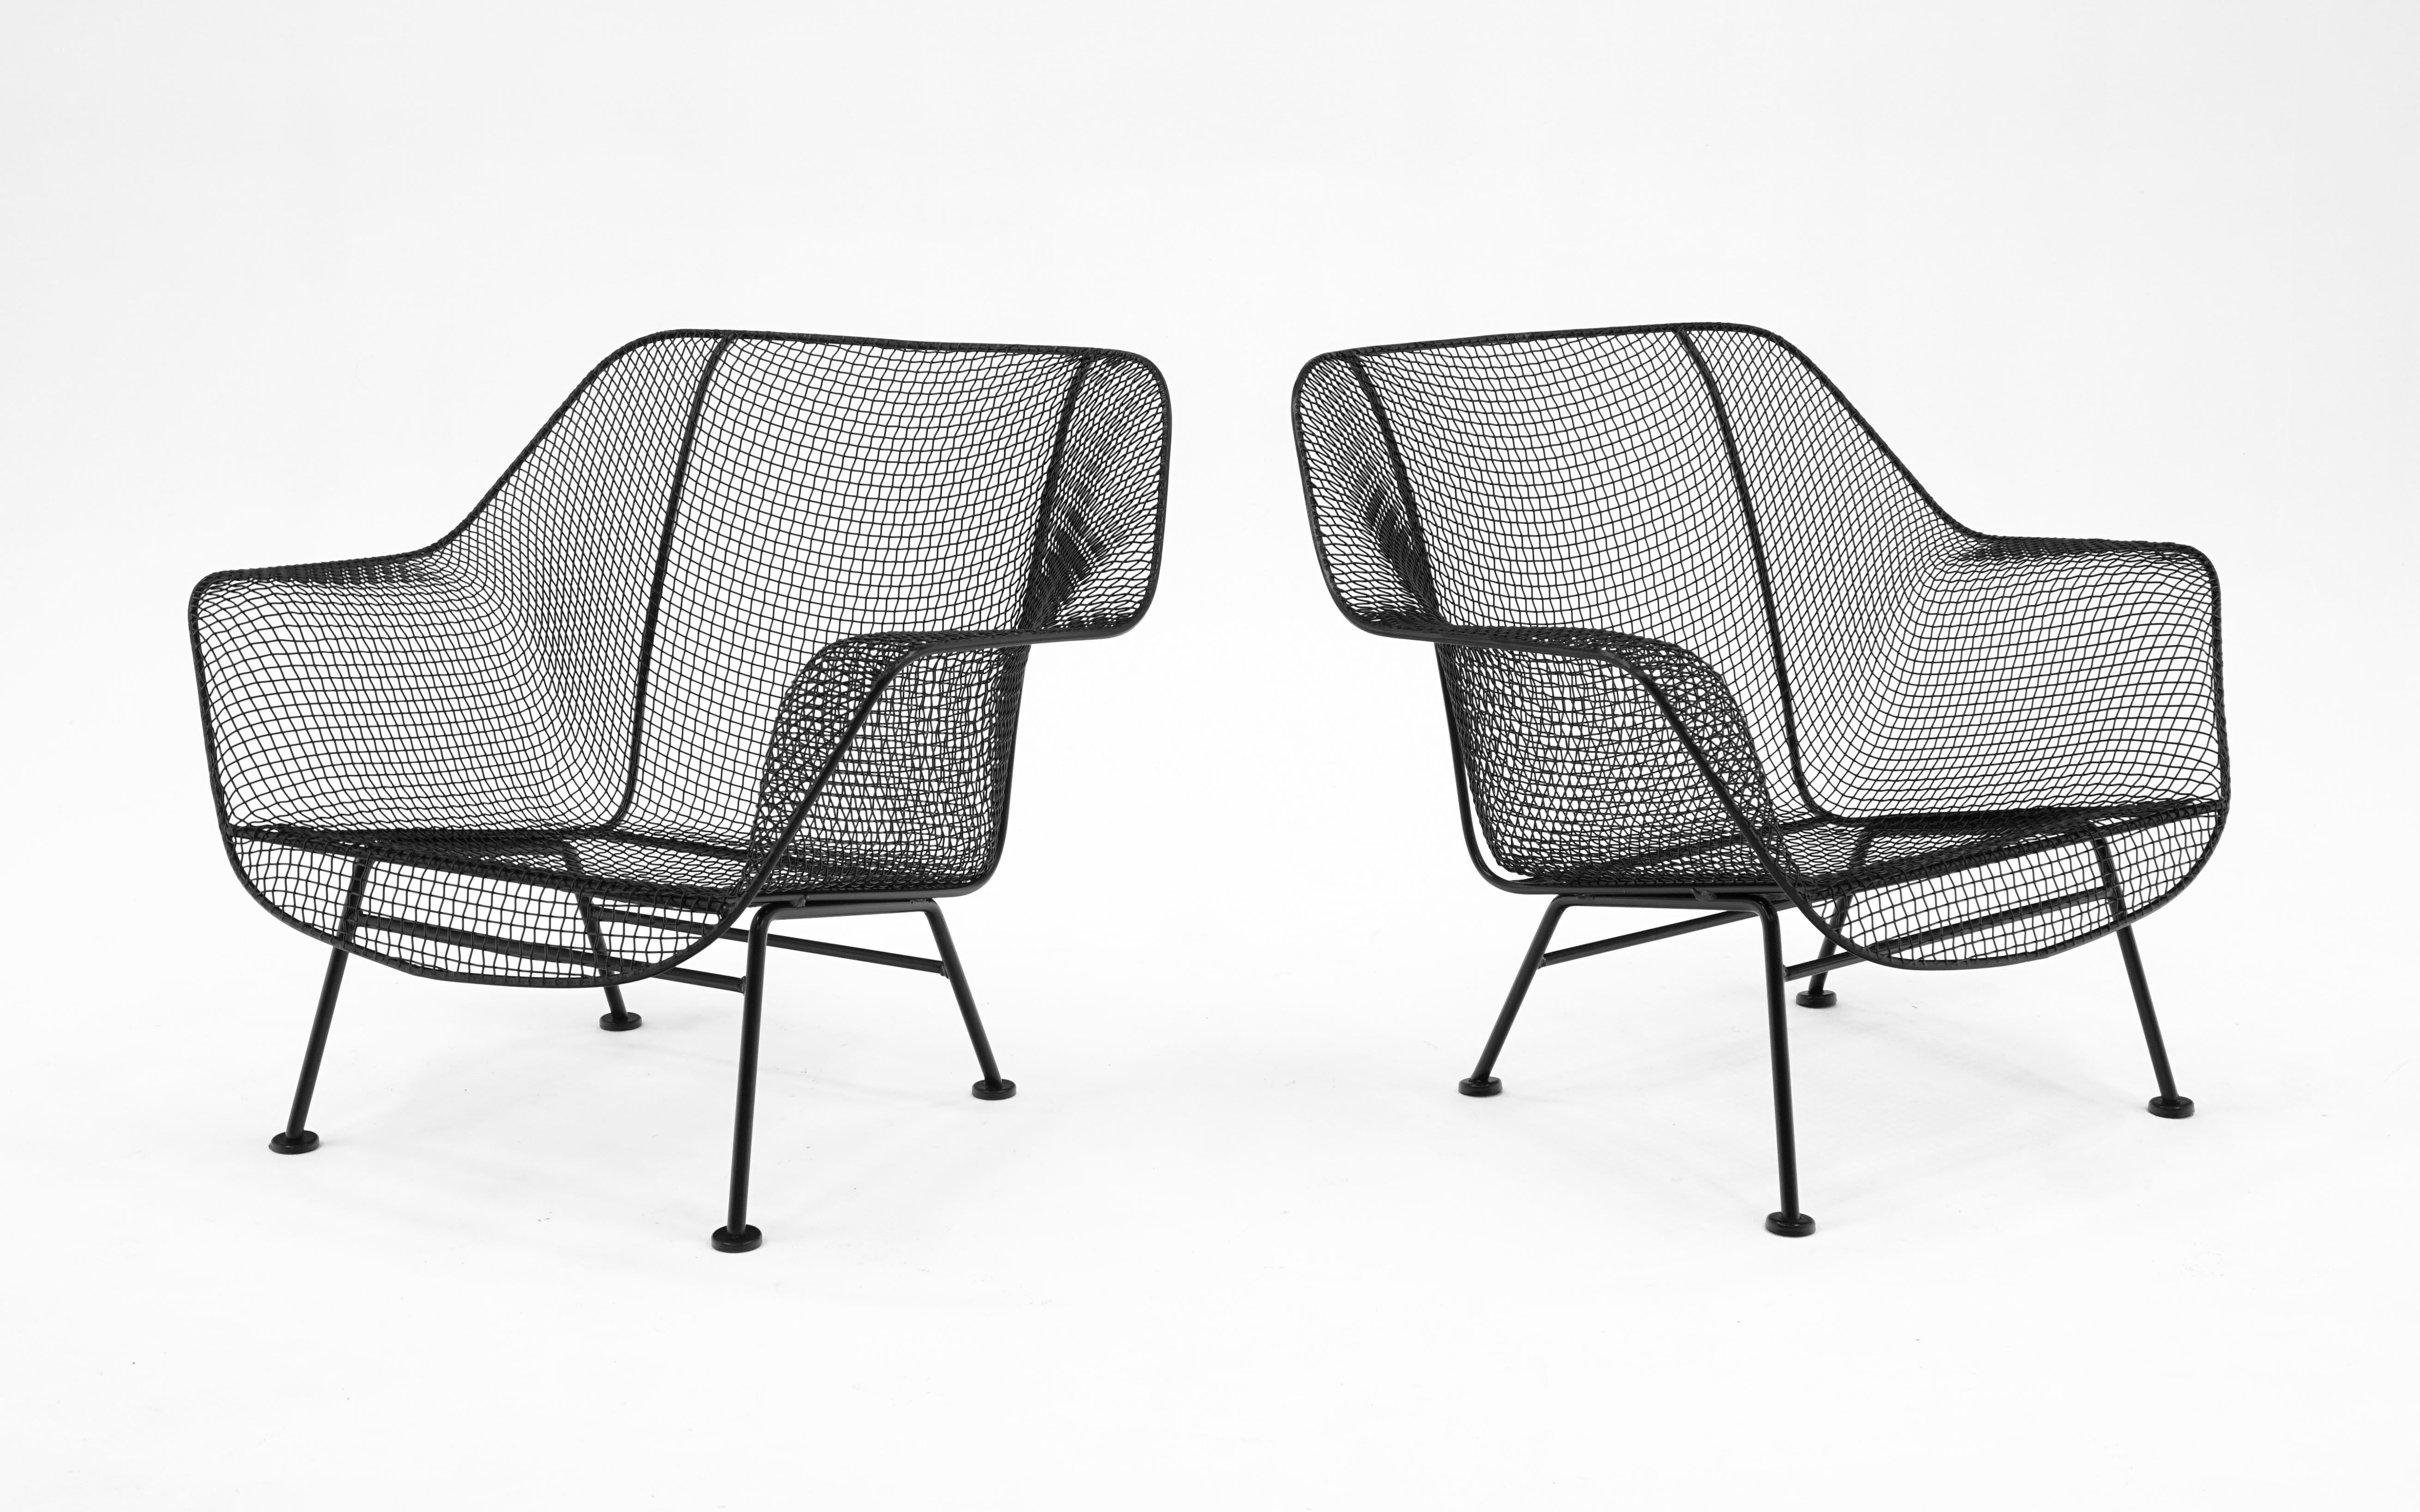 Often attributed to Russell Woodard but designed by John Woodard, these two outdoor, pool, patio lounge chairs have been professional media blasted and powder coated in a satin black finish. Ready to use.